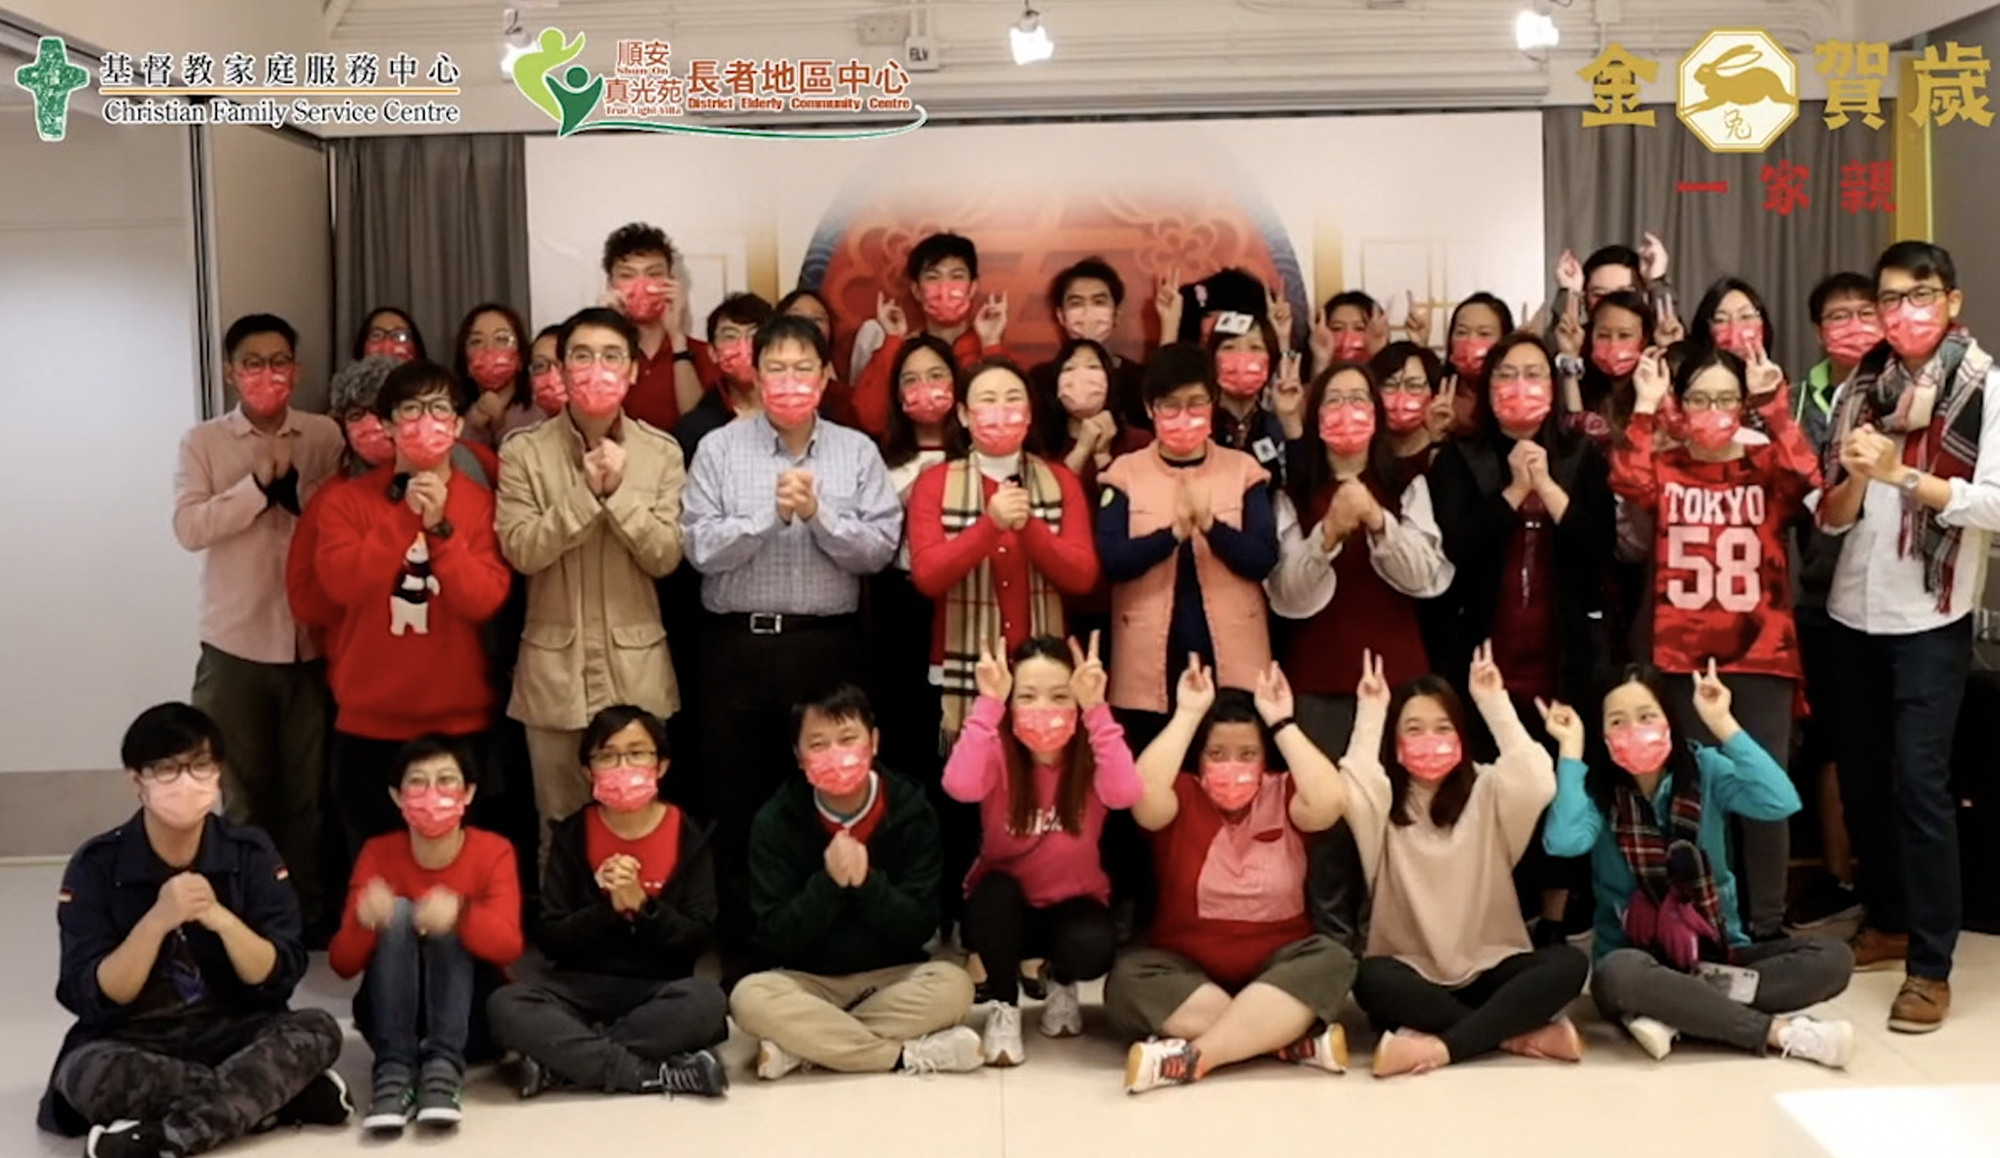 Cover Image - True Light Villa & Shun On District Elderly Community Centre Chinese New Year Youtube Programme 